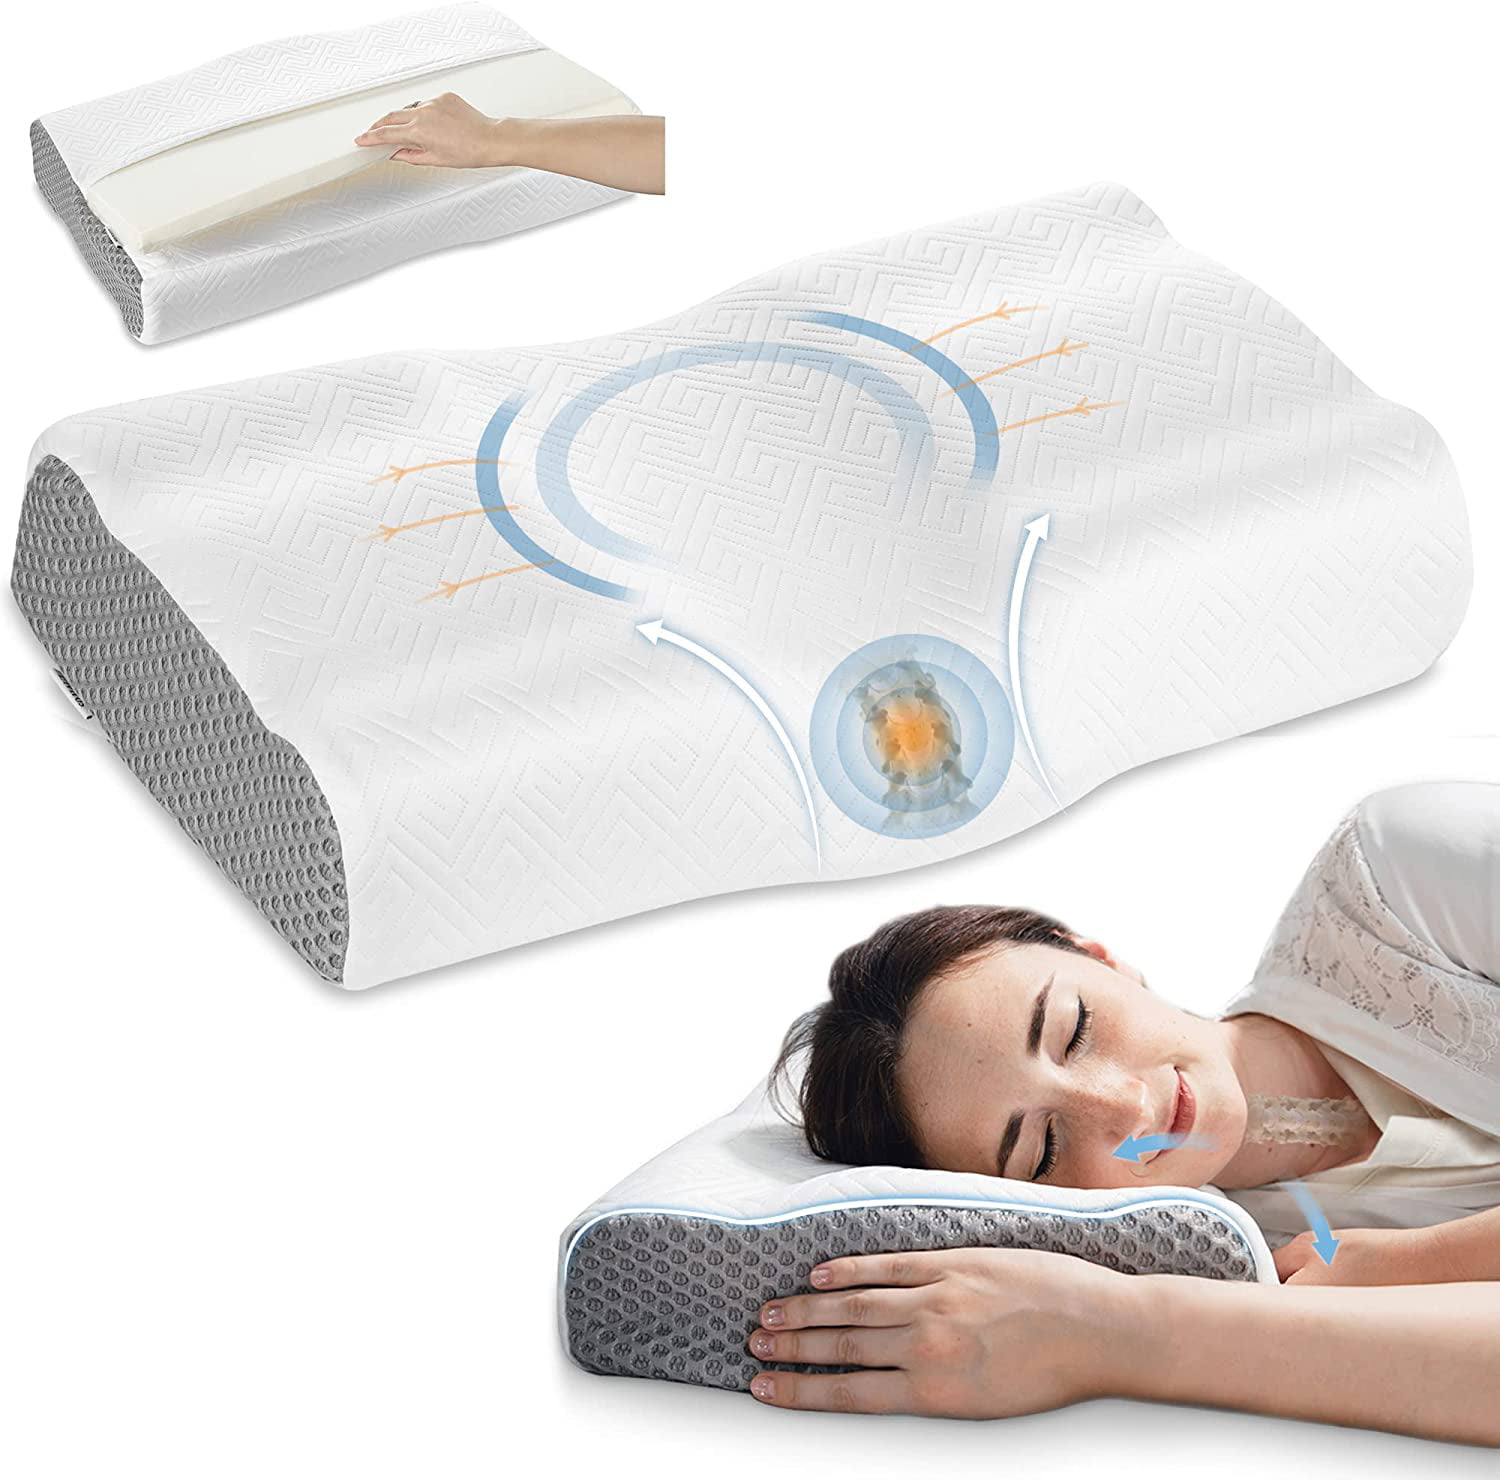 Memory Cotton Sleep Pillow Contour Cervical Orthopedic Neck Back Support Breath 